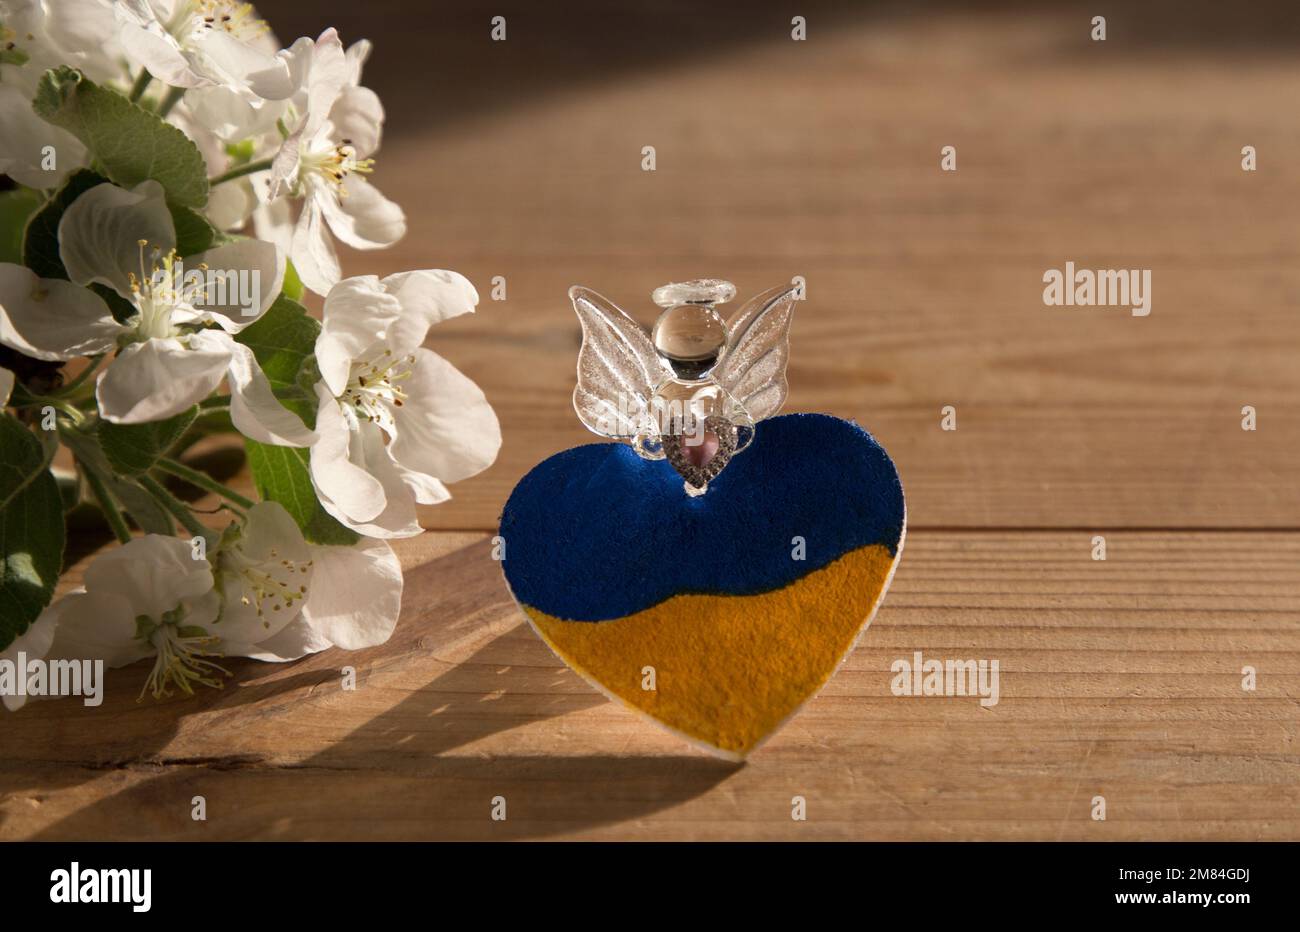 Souvenir angel with a halo, a yellow-blue Ukrainian heart, a flowering spring twig illuminated by backlight. Pray for peace for Ukraine. Stop the war. Stock Photo